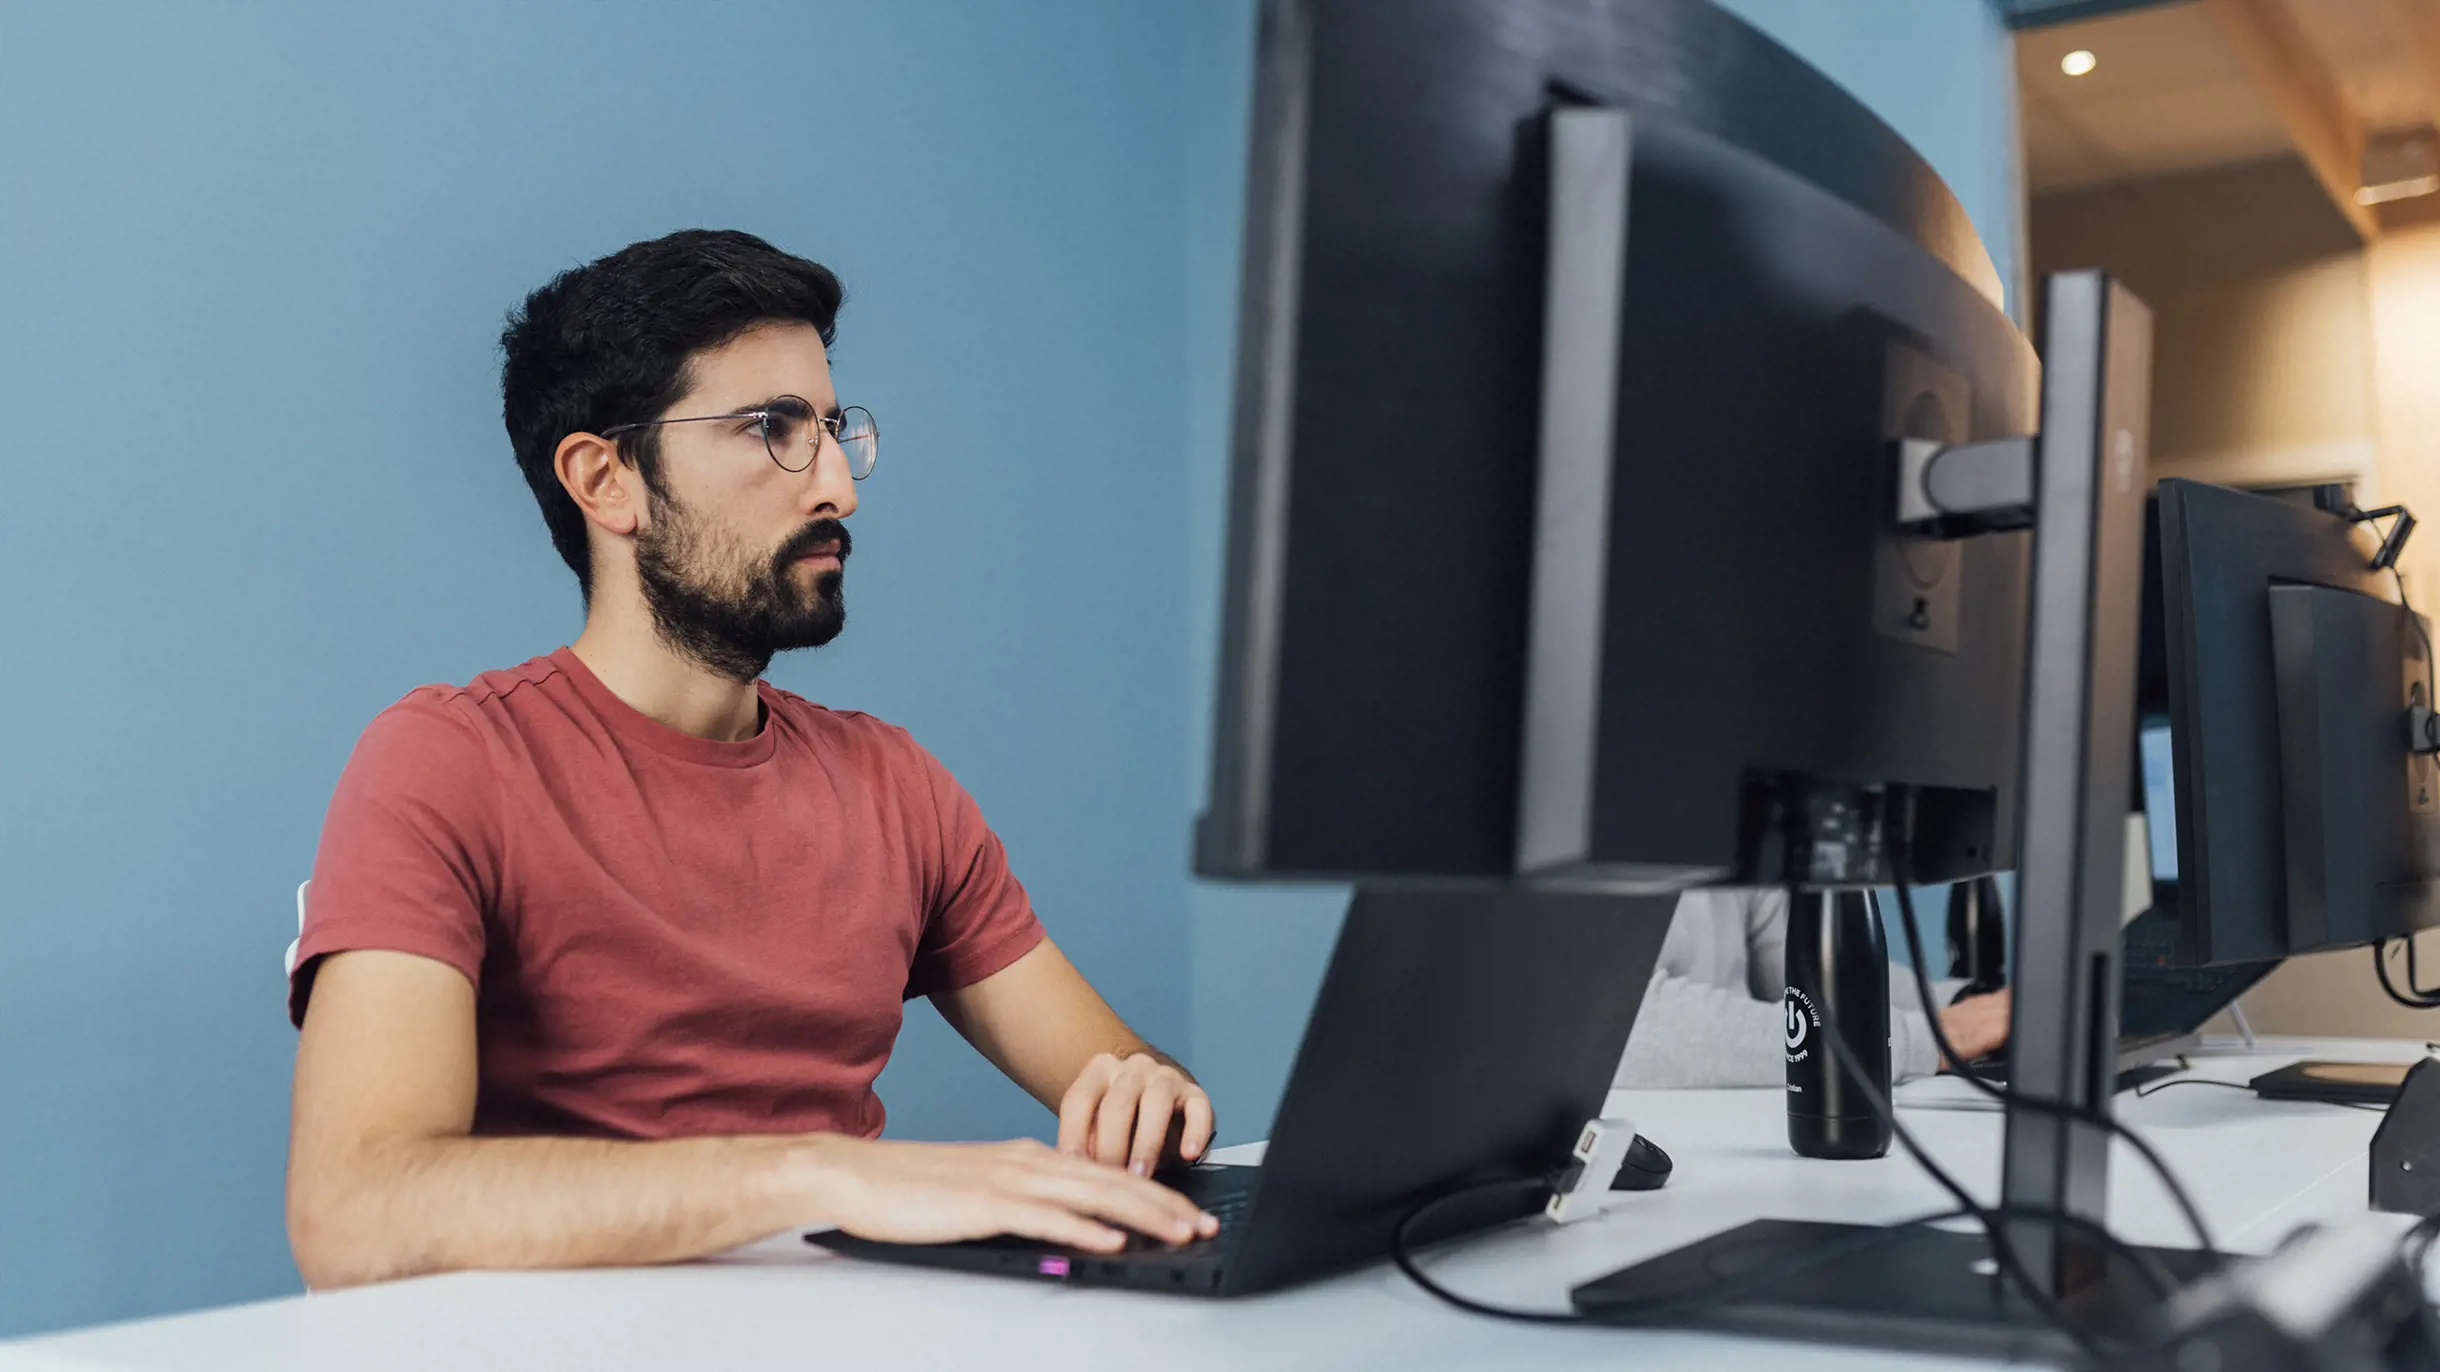 Man in red t-shirt concentrated on working with two screens